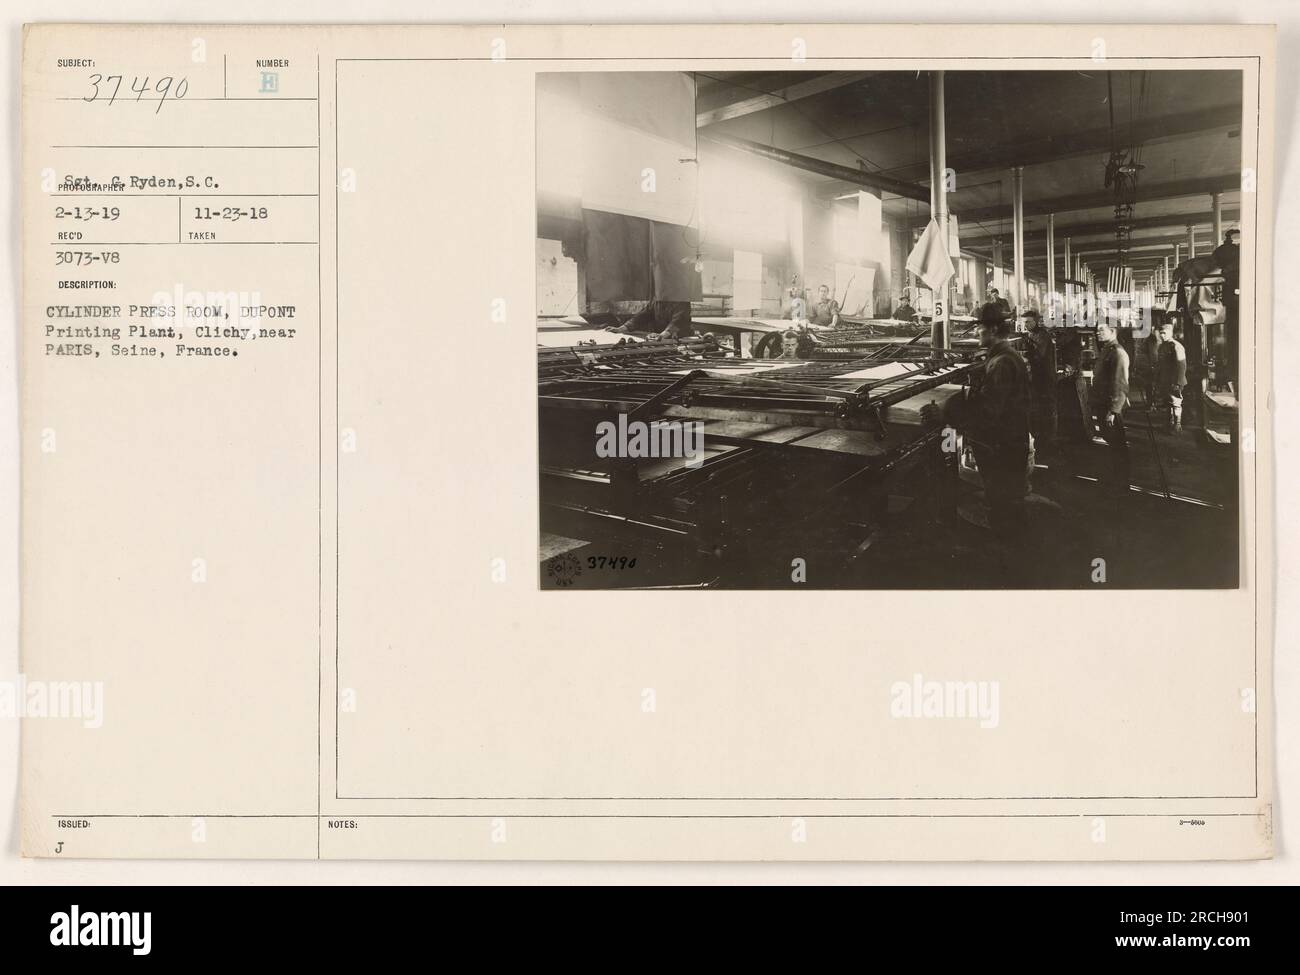 Image depicting the interior of the cylinder press room at the DuPont Printing Plant in Clichy, near Paris, France. The photograph was taken during World War I and is part of the collection of American military activities. It was issued on November 23, 1918, with the reference number 37490. Stock Photo